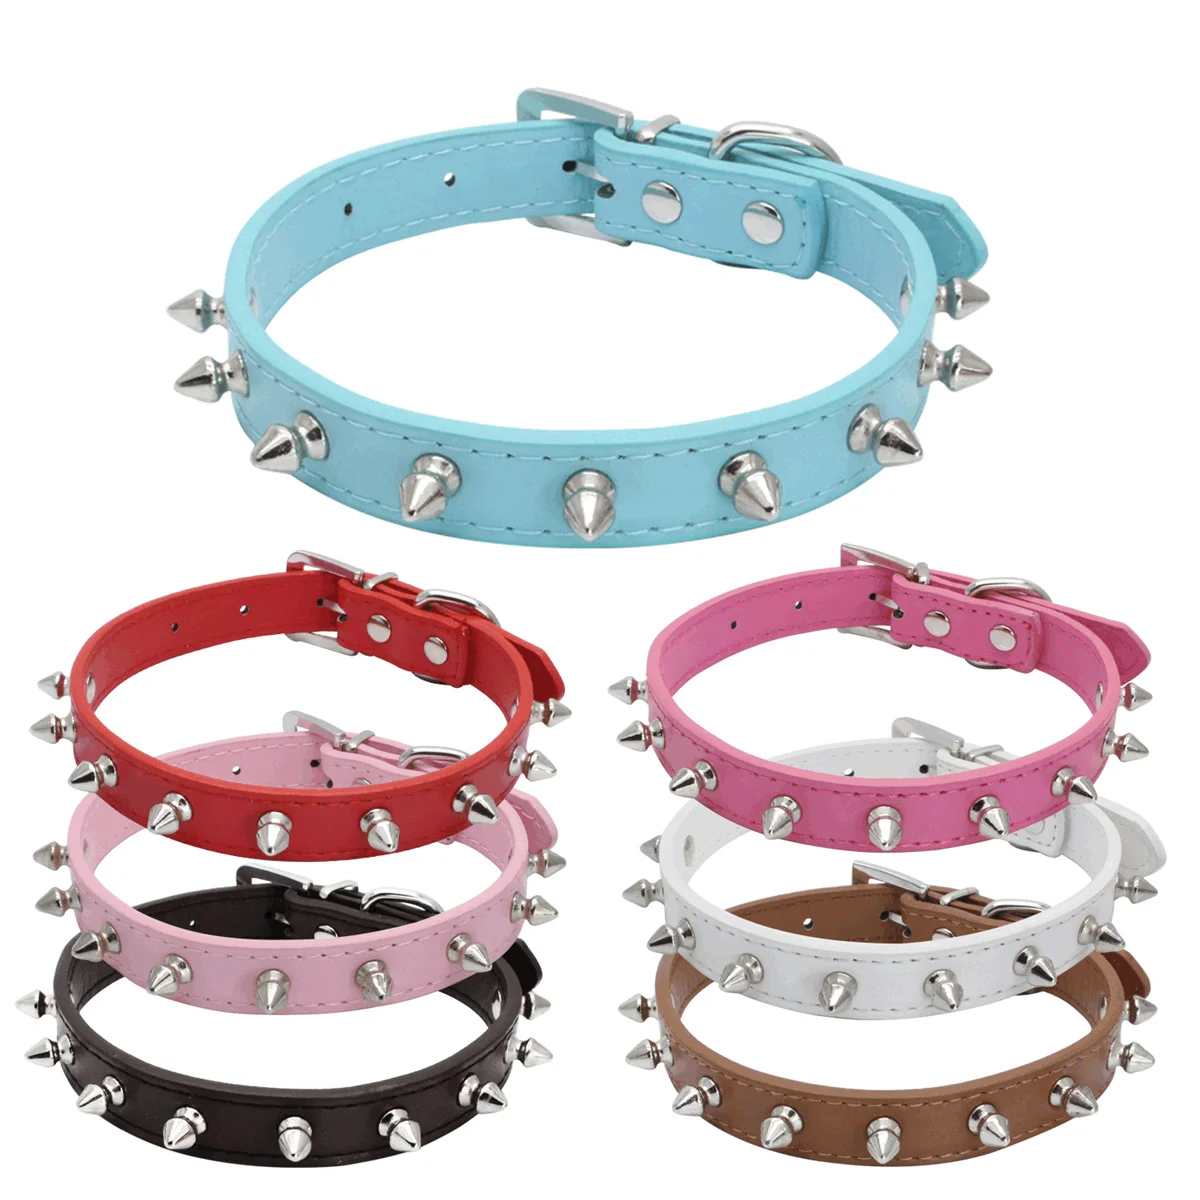 

1pc Cool Cat Dog Collar Leather Spiked Studded Collars For Small Medium Colorful Pets Necklace Dogs Cats Neck Strap Pet Products